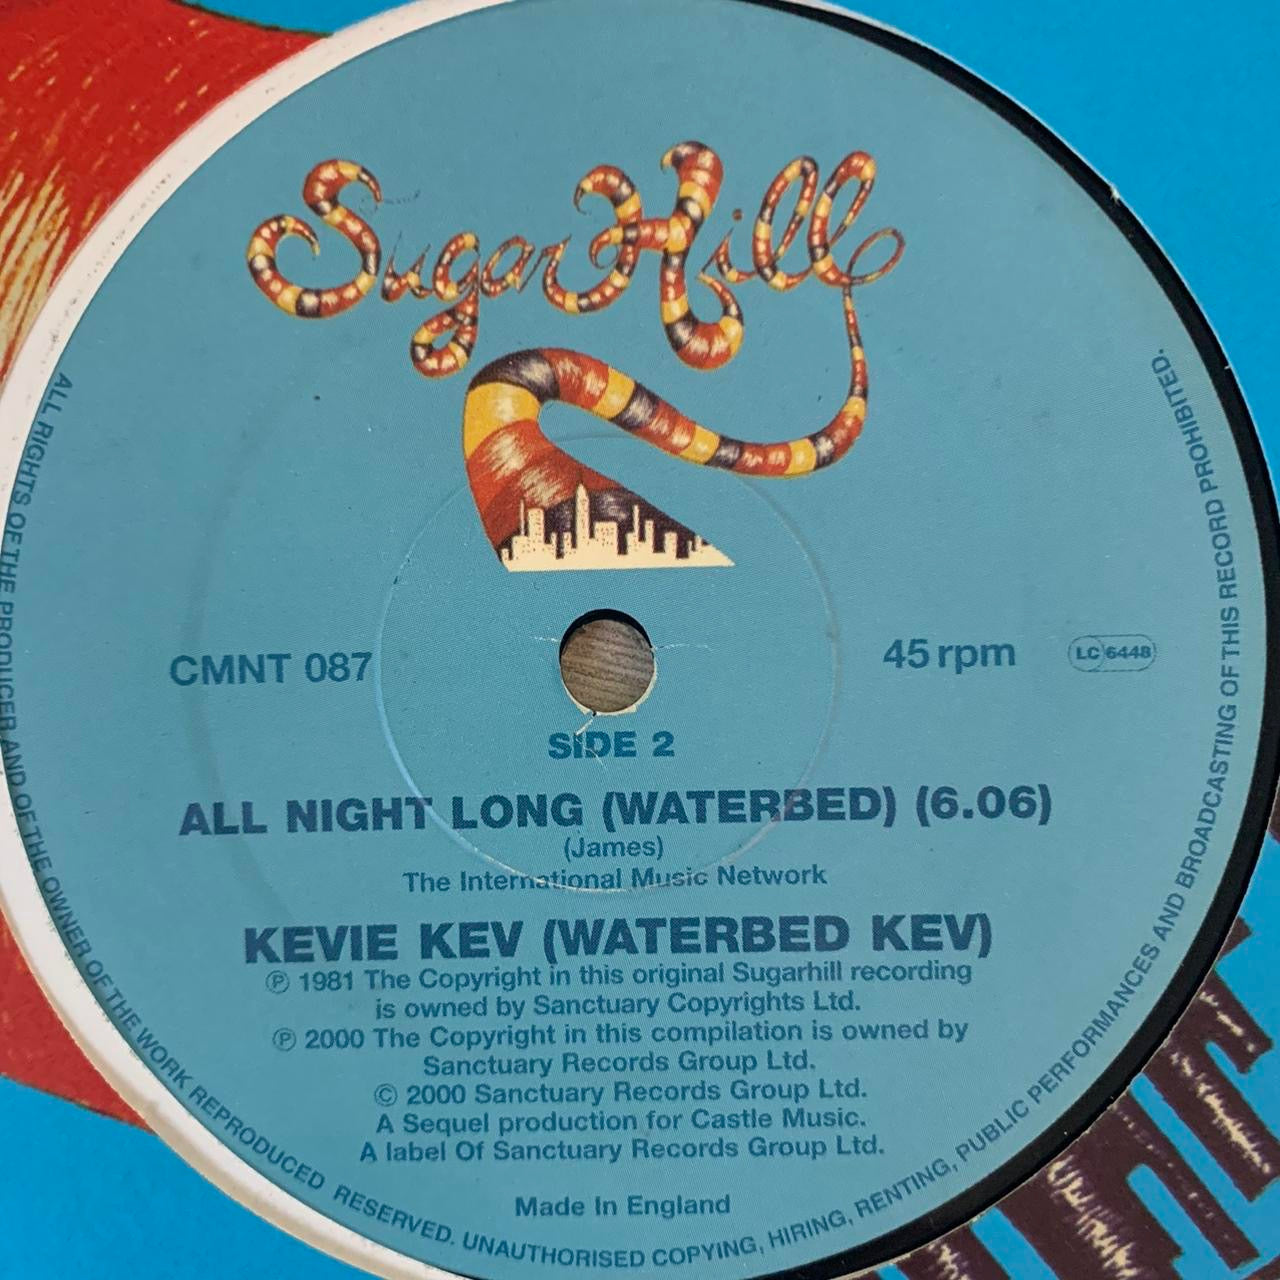 Super-Wolf “Super Wolf Can Do It” / Kevie Kev ( Waterbed Kev ) “All Night Long” ( Waterbed ) 2 Track 12inch Vinyl